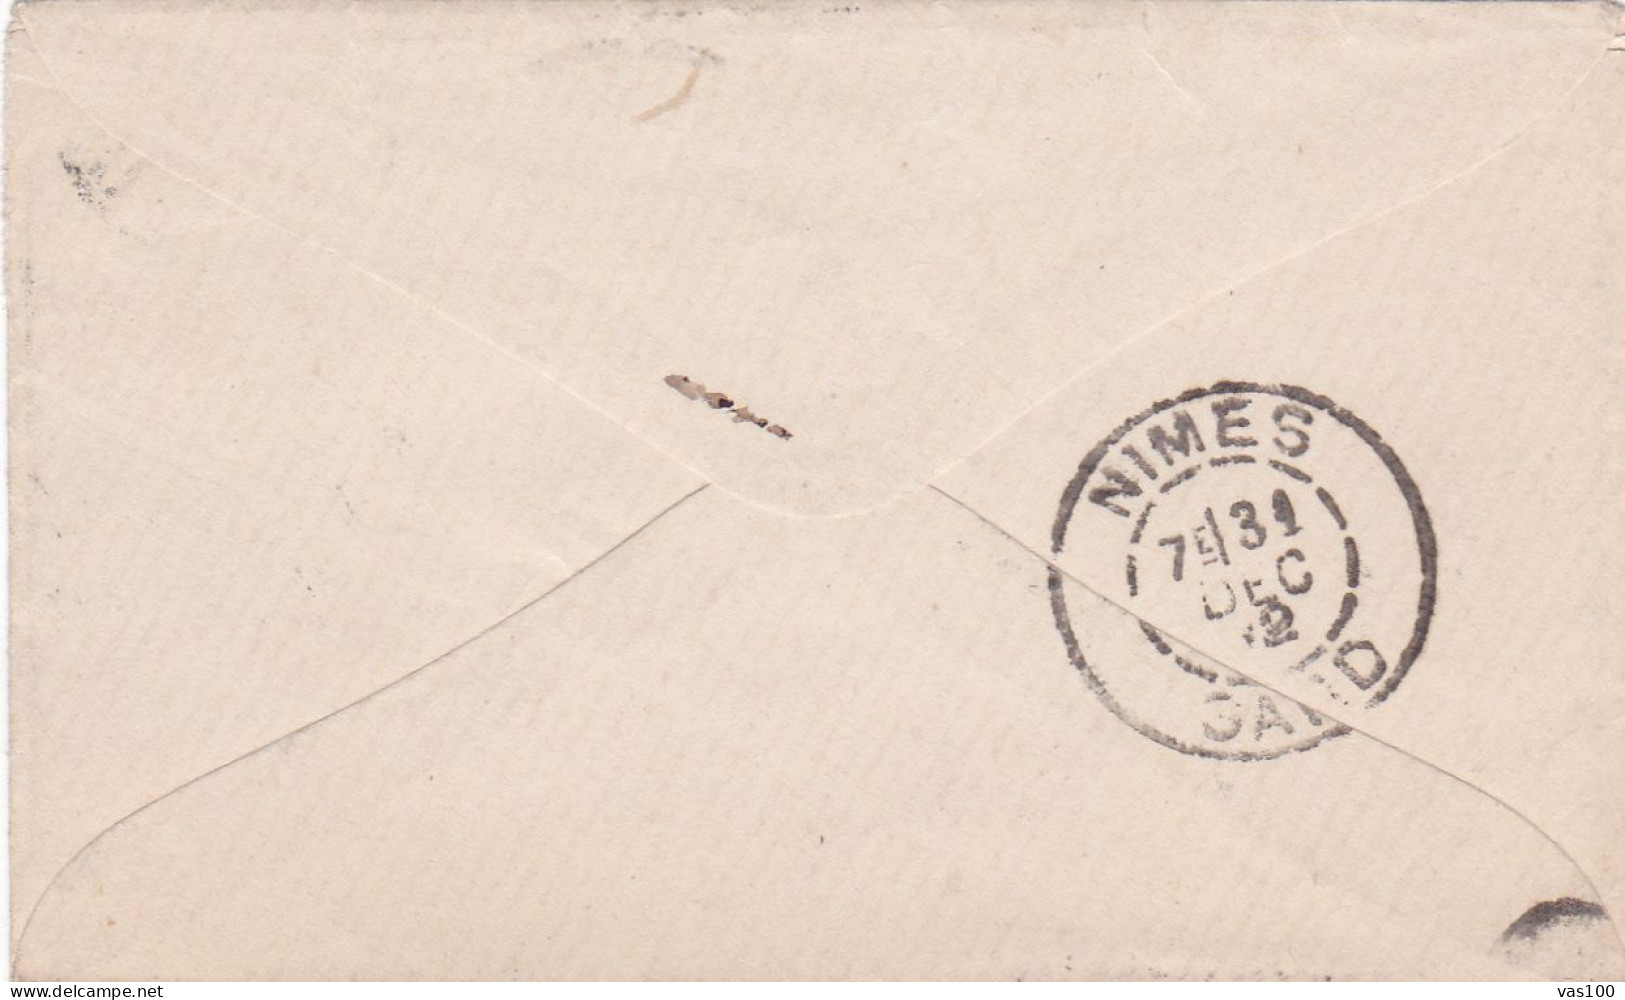 RUSSIA - Postal History - COVER To FRANCE 1891 NIMES - Covers & Documents